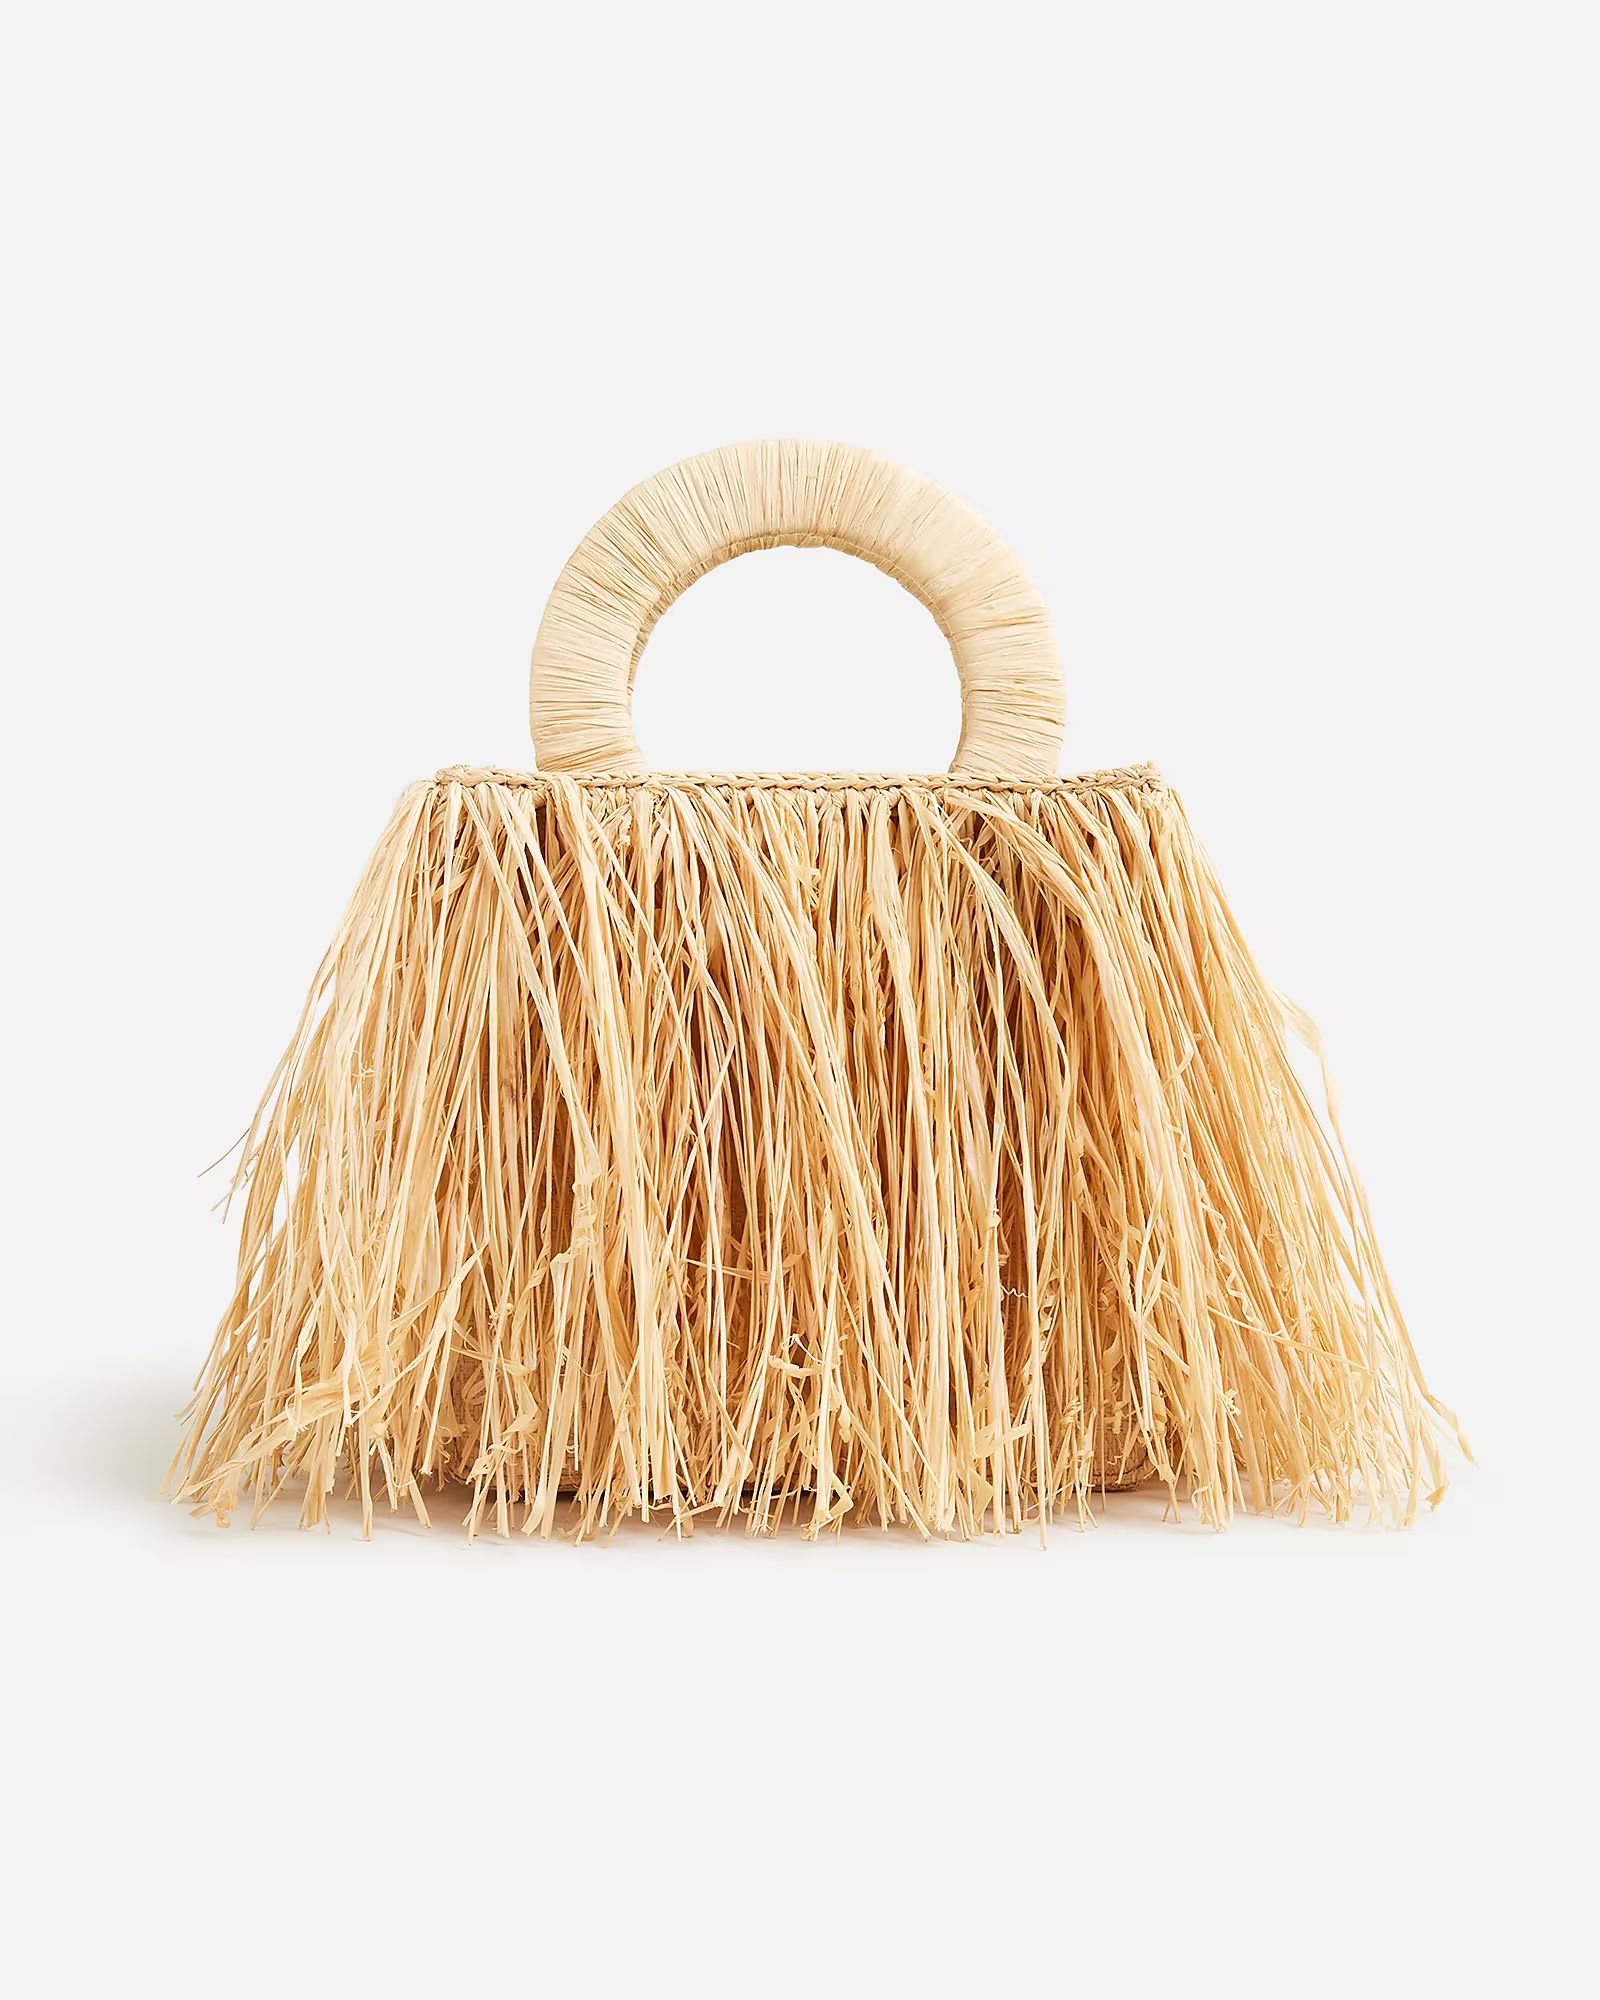 3.0(1 REVIEWS)Fringe straw bag$98.0030% off full price with code SHOP30NaturalOne SizeSize & Fit ... | J.Crew US